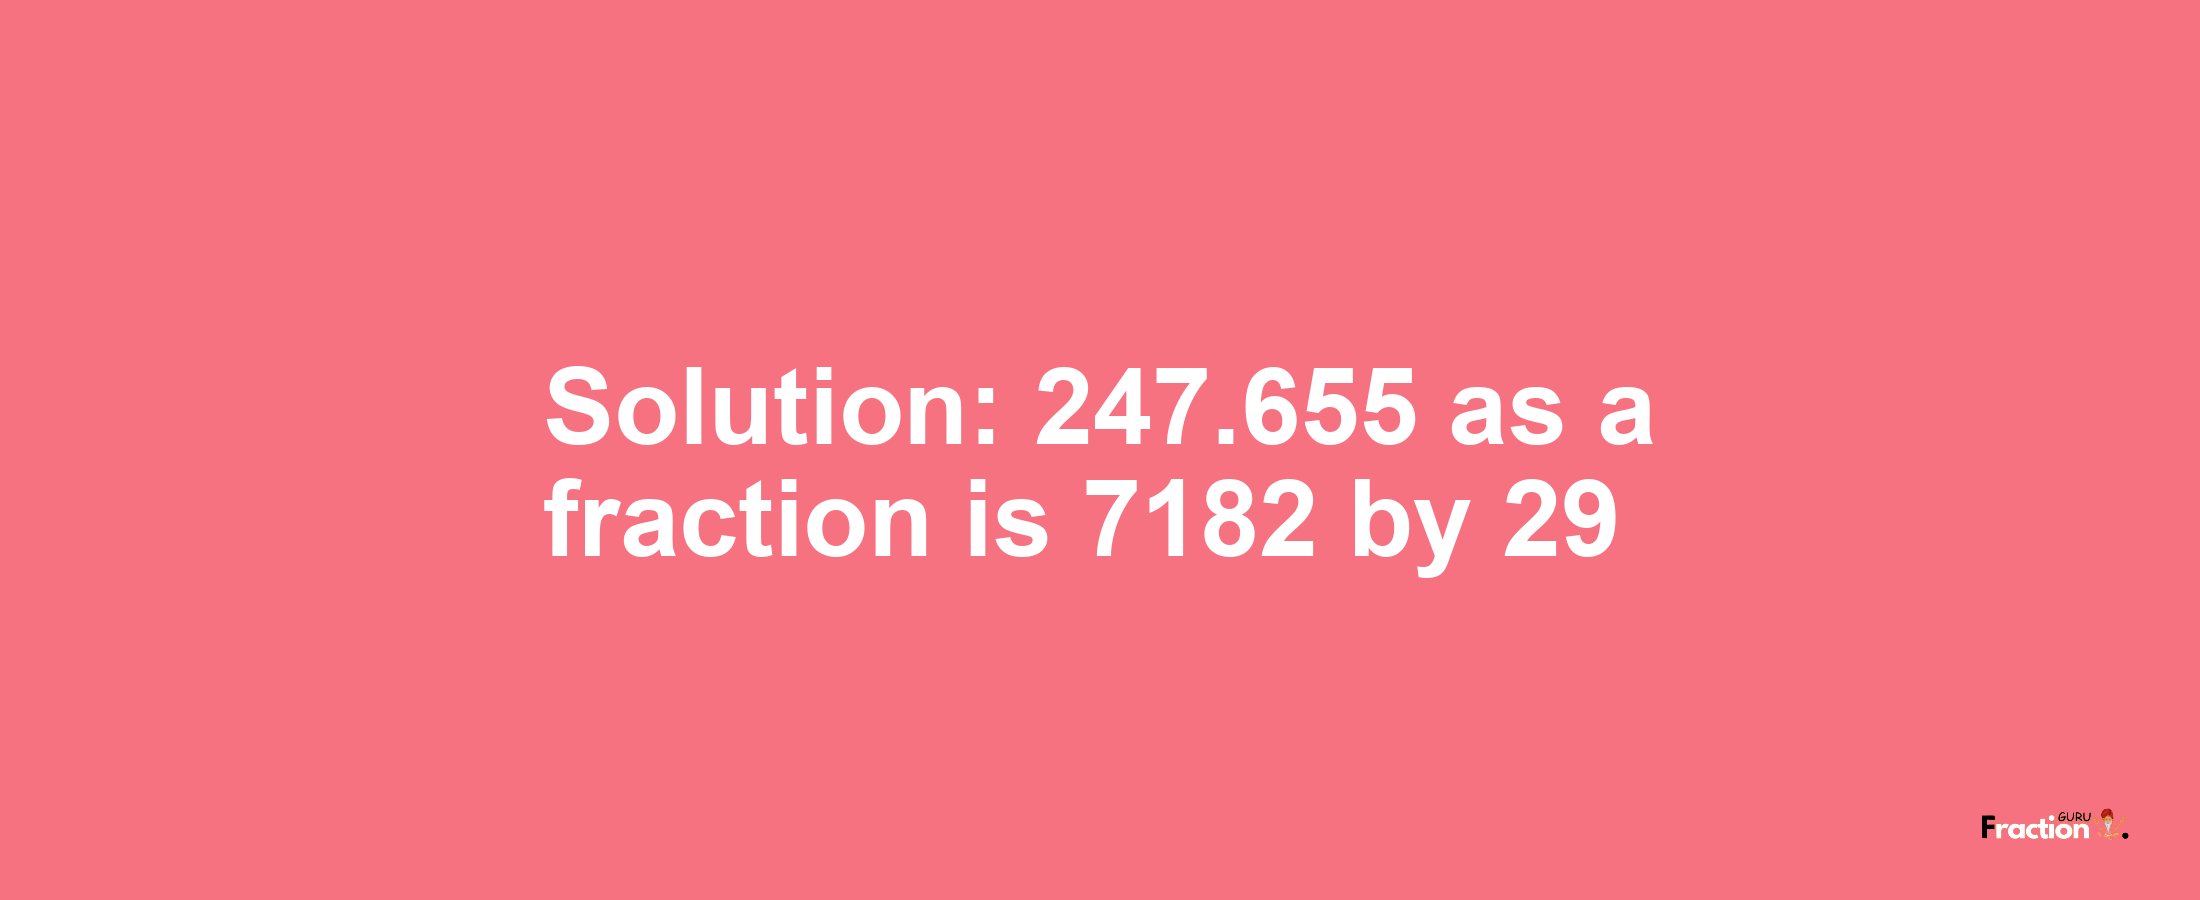 Solution:247.655 as a fraction is 7182/29